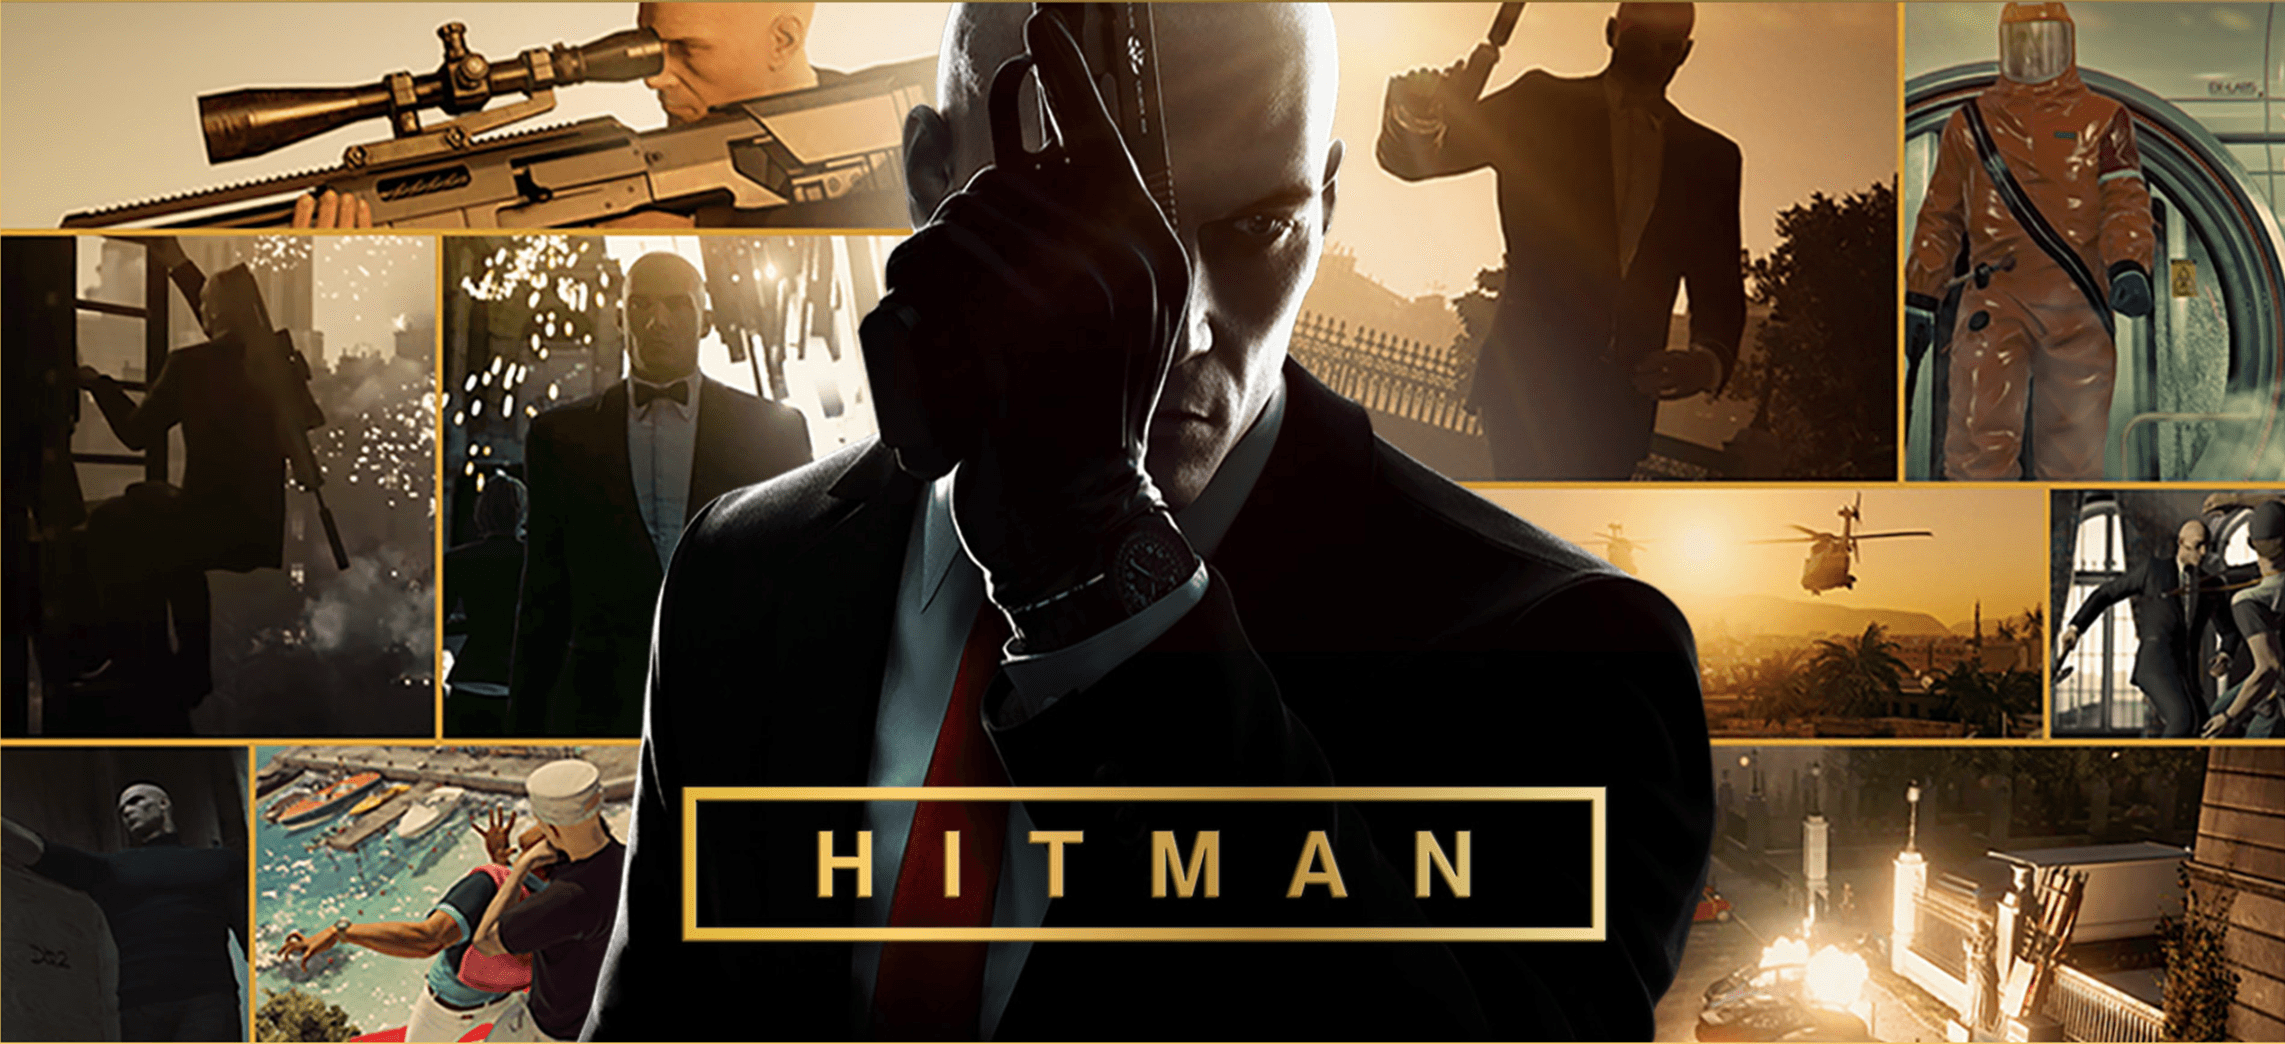 Hitman 3 Mobile - How to play on an Android or iOS phone? - Games Manuals